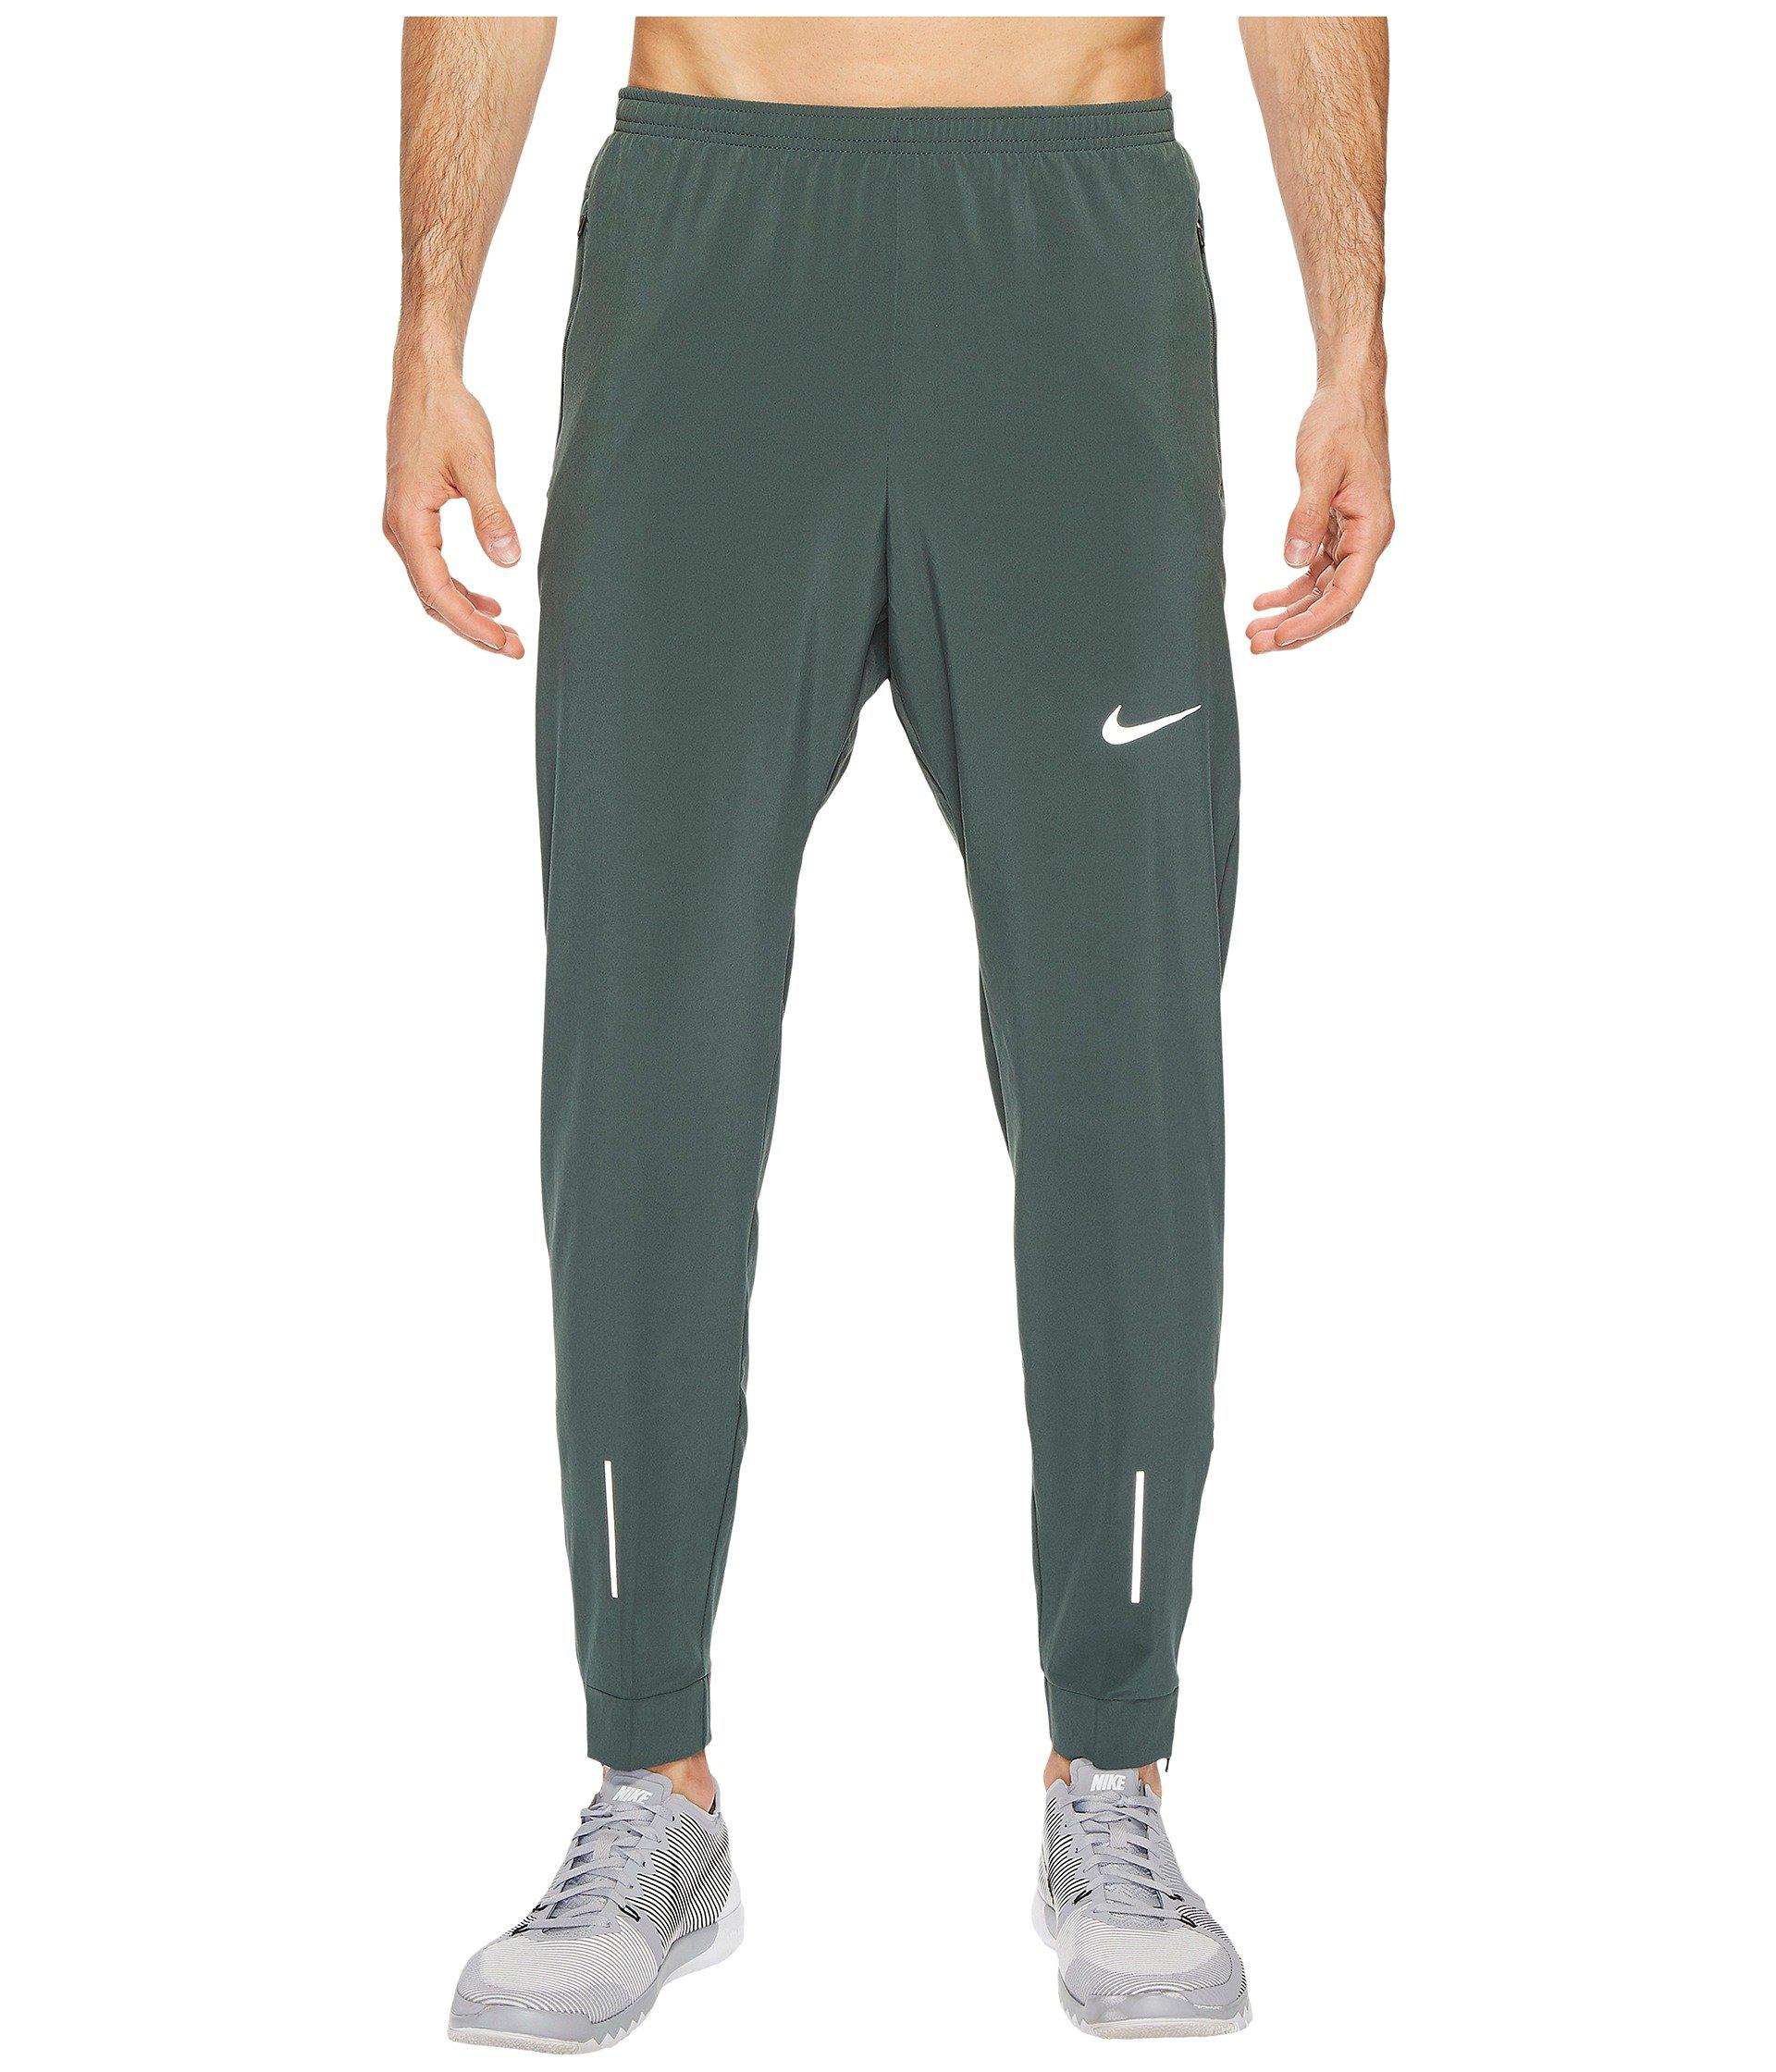 Nike Synthetic Flex Essential Running Pant in Vintage Green (Green) for Men  - Lyst